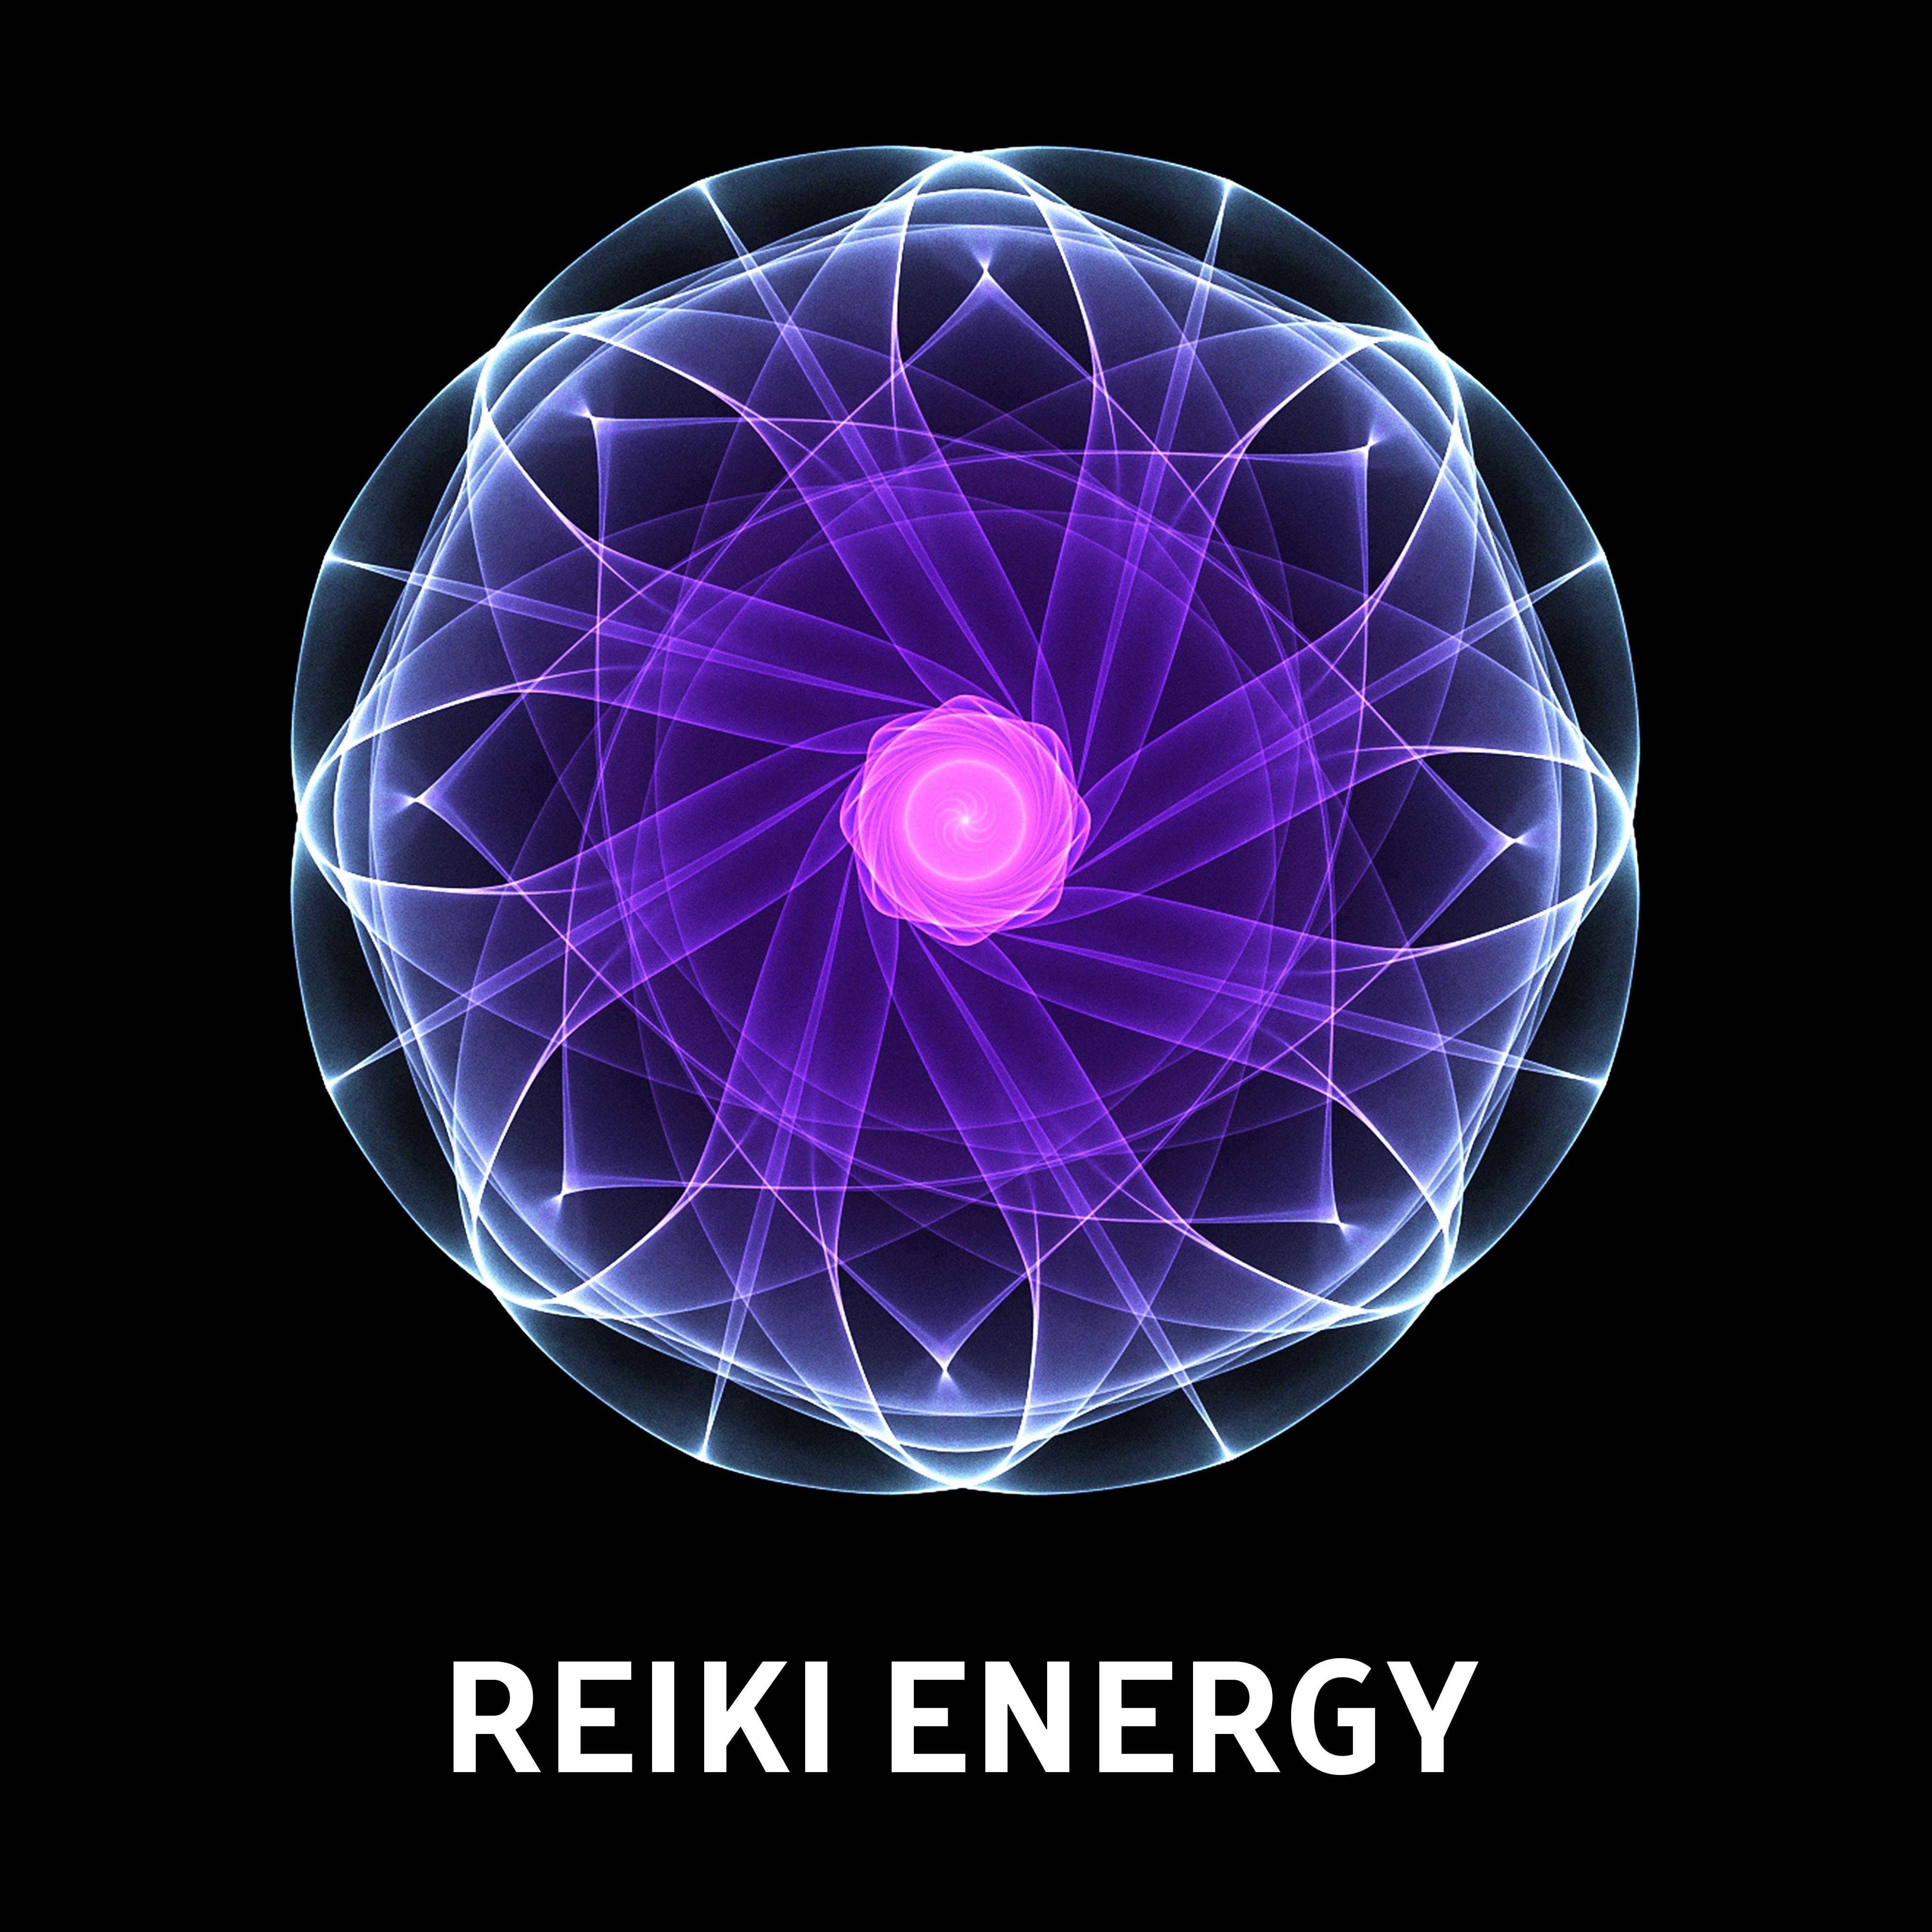 Reiki Energy  Calming Sounds of Nature, Asian Relaxation, Stress Relief, Deep Relaxation, New Age 2017